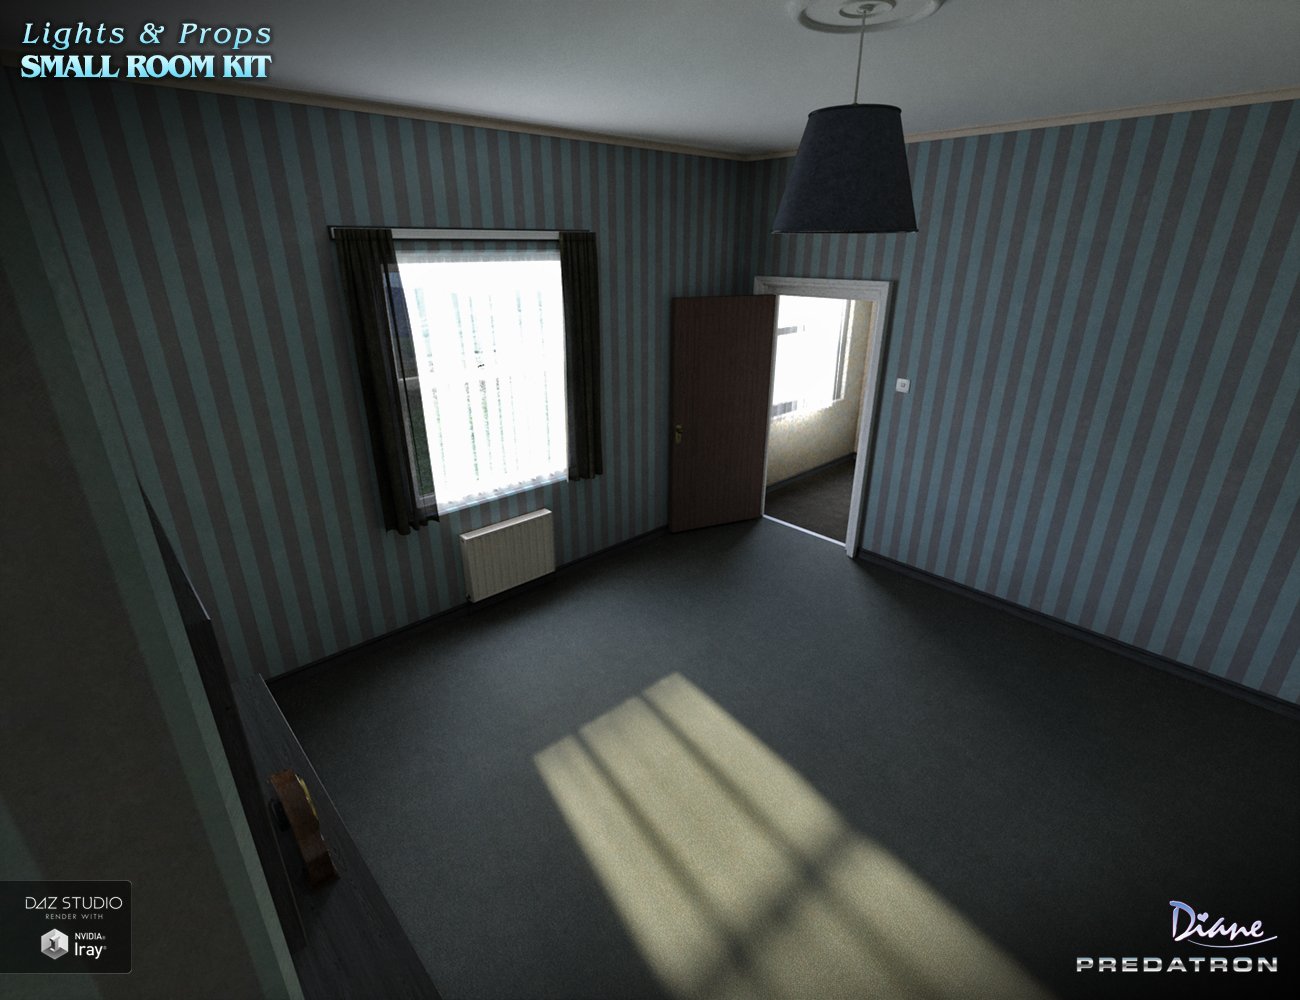 Small Room Kit: Lights and Props by: PredatronDiane, 3D Models by Daz 3D